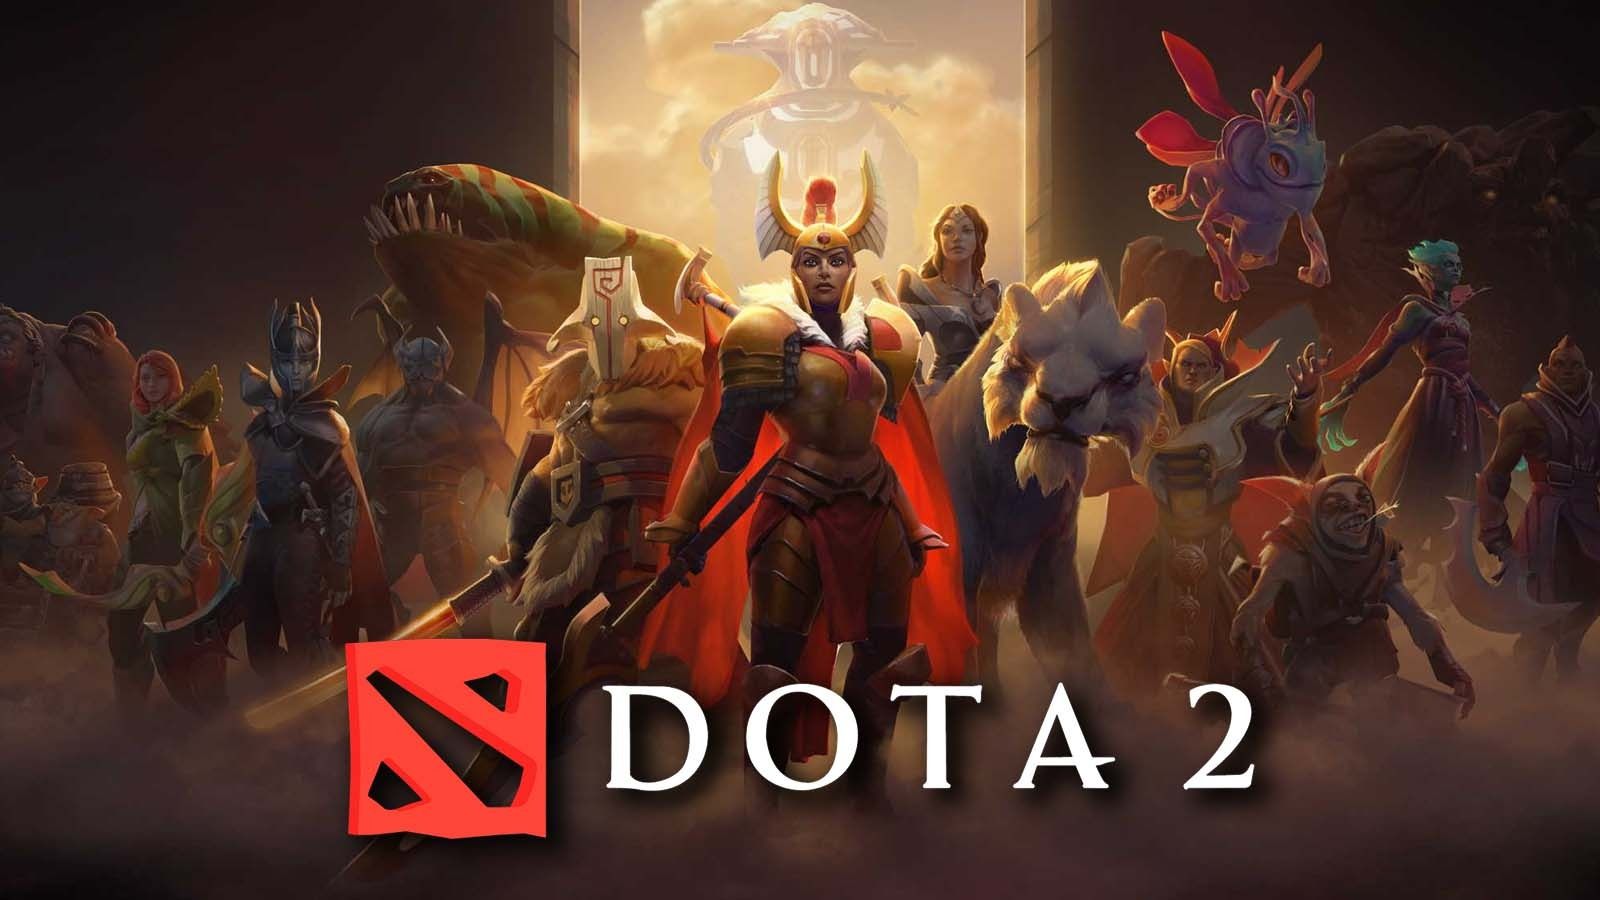 Dota 2 Update 7.31 Release Time & Patch Details Today (February 23)